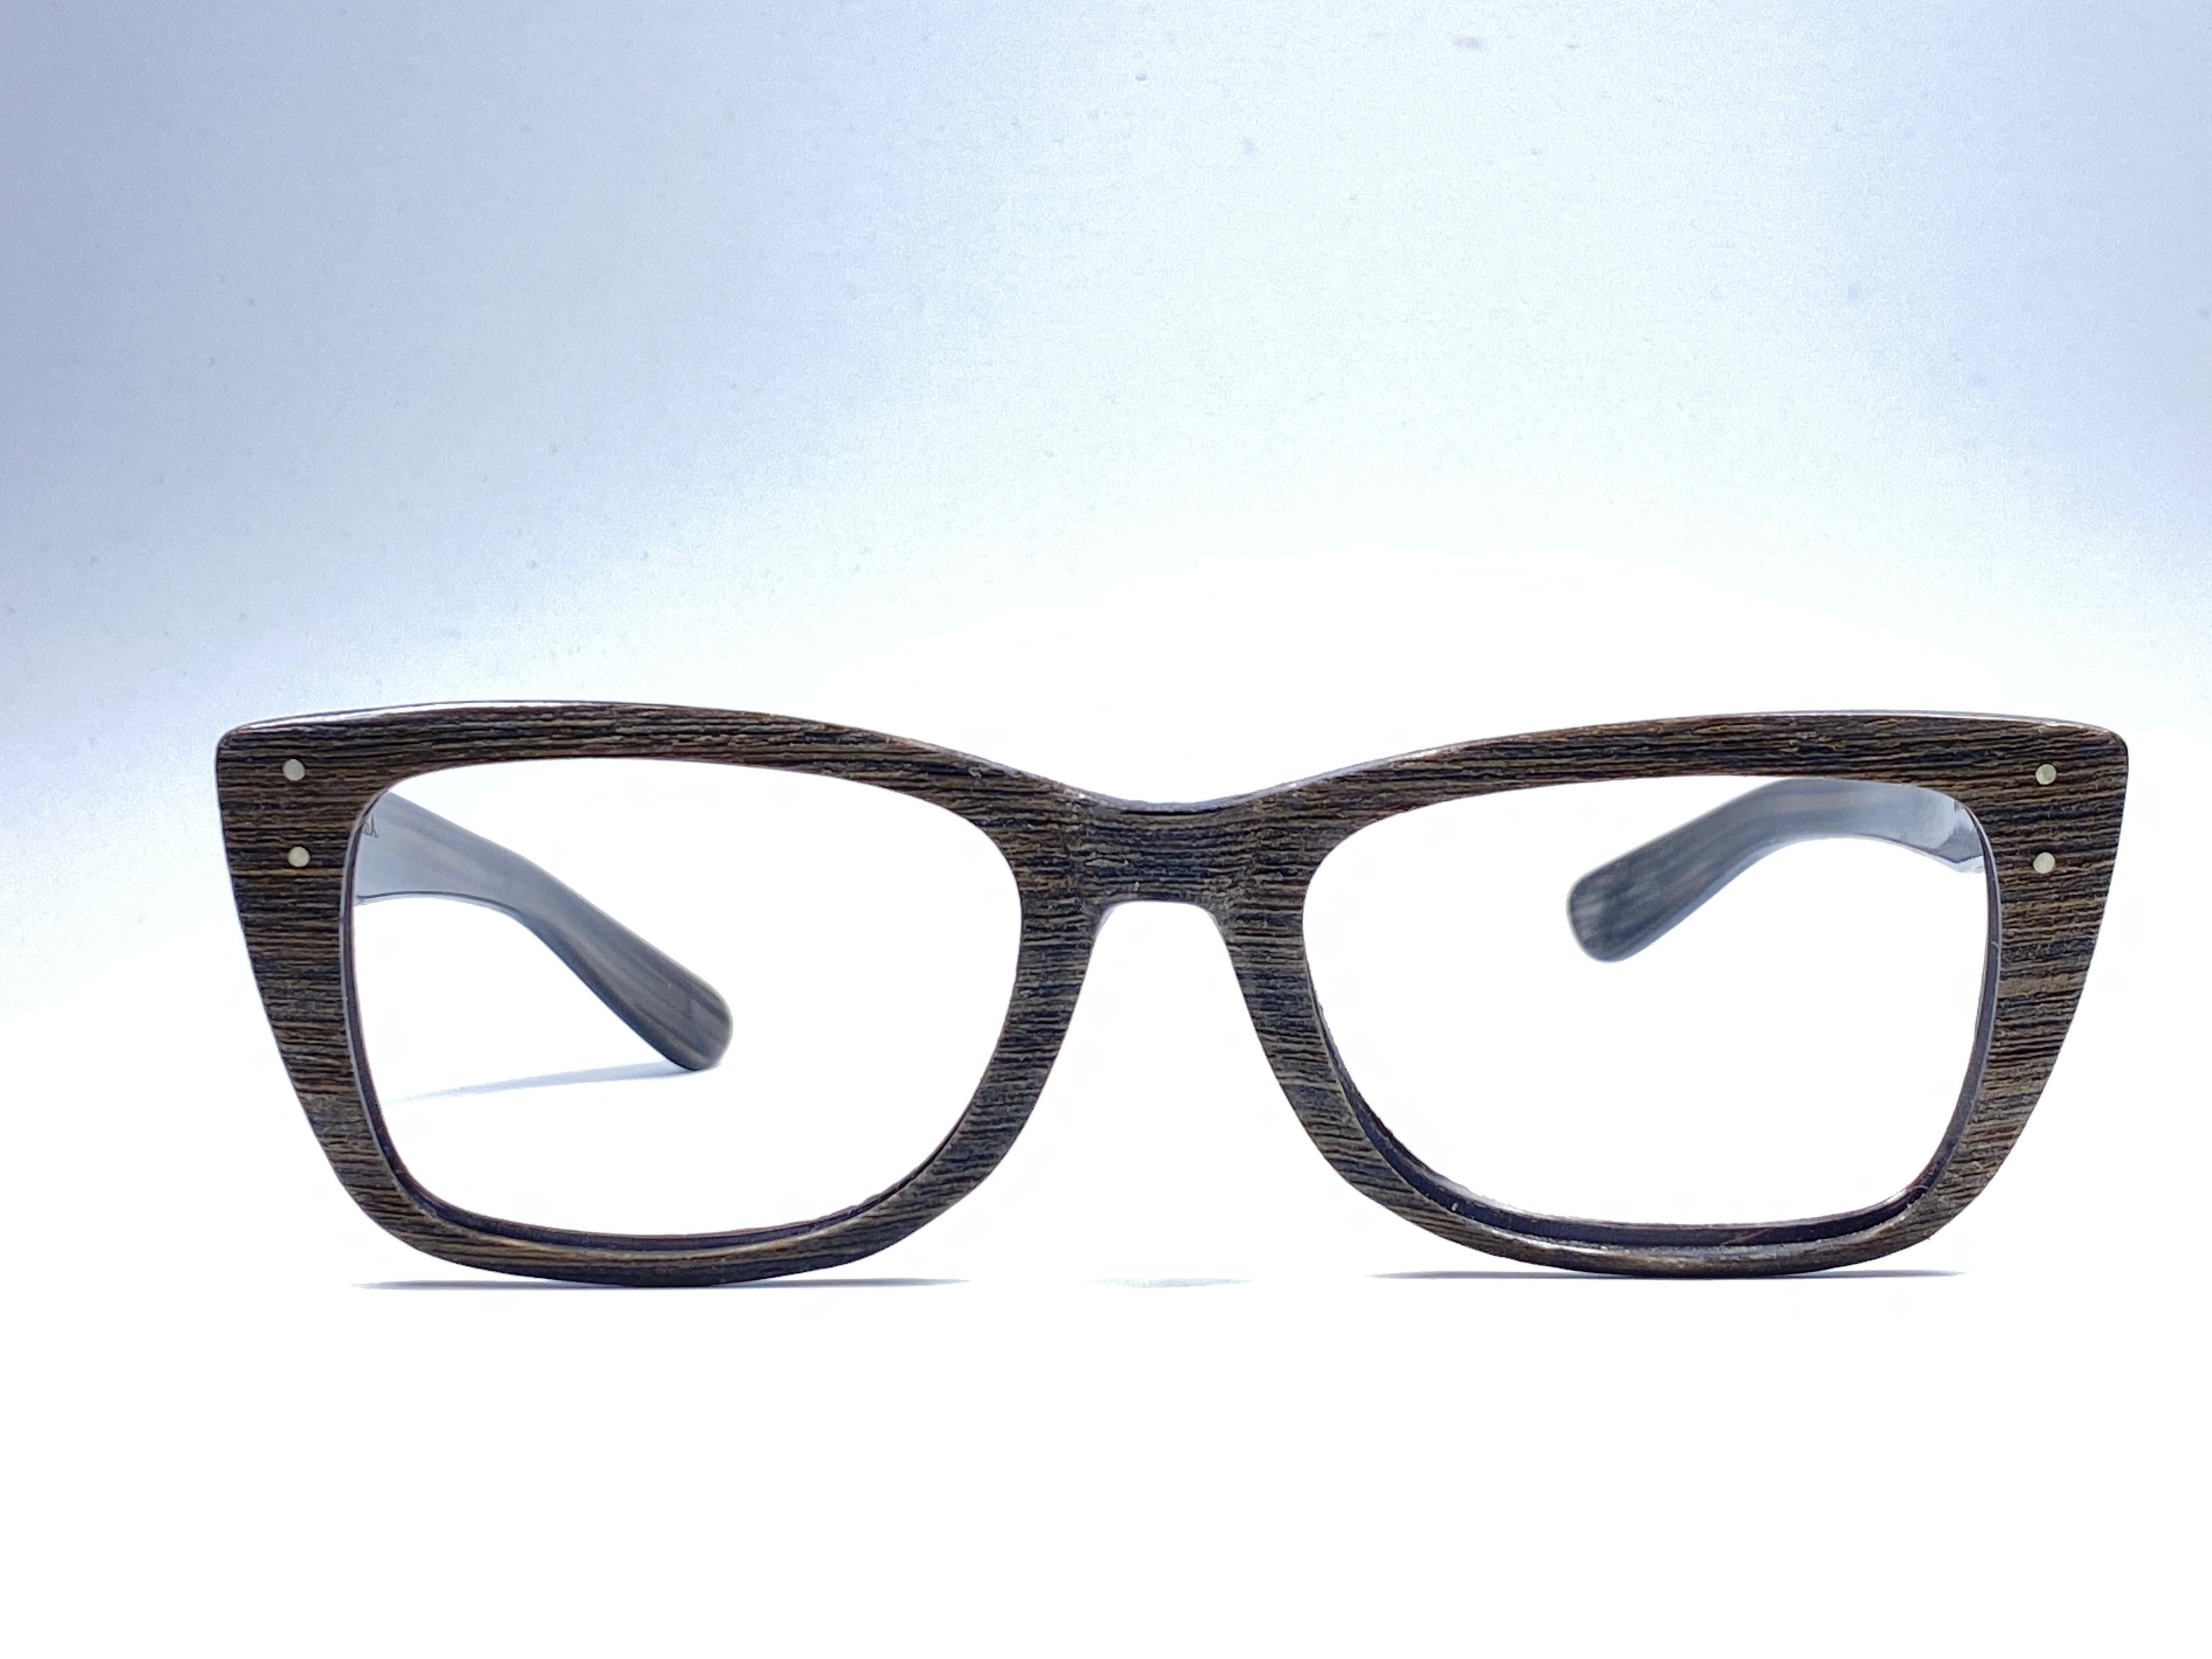 Super Rare 1960's Caribbean in dark wood with thinner and elongated temples .  
Bausch and Lomb USA Made. No lenses. Ready for your prescription lenses.
 Straight out of the 1960's. All hallmarks. Minor sign of wear due to 60 years of storage. A